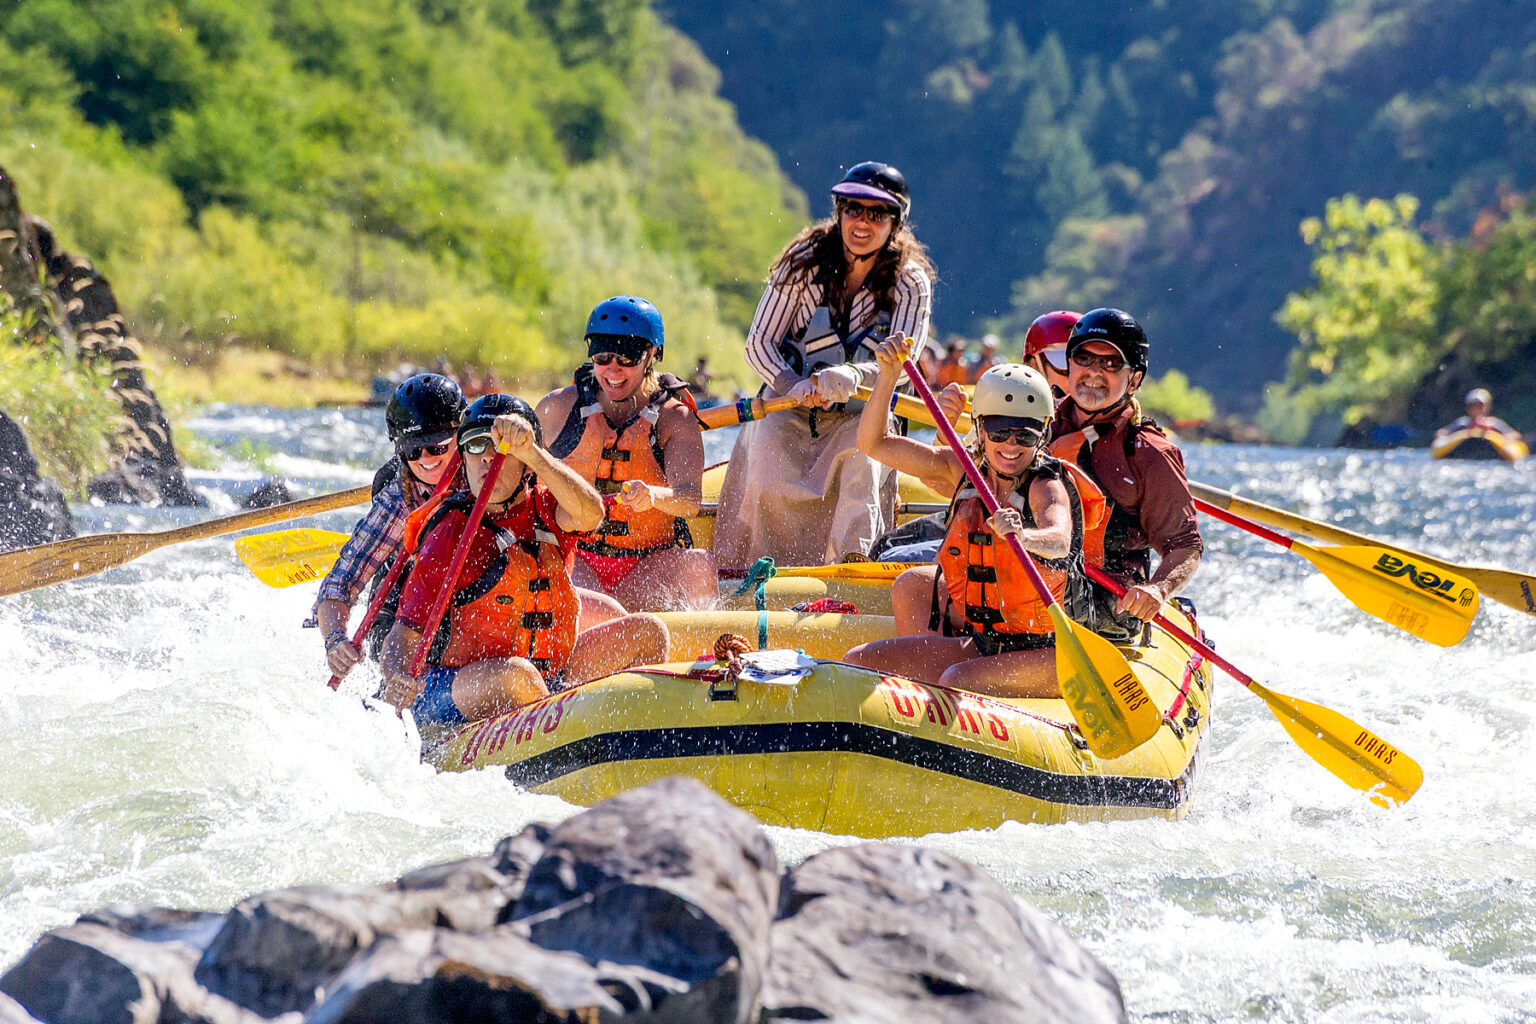 Guide qnd guests smile for the camera as they paddle their oar-assisted paddle raft through rapids on the Rogue River